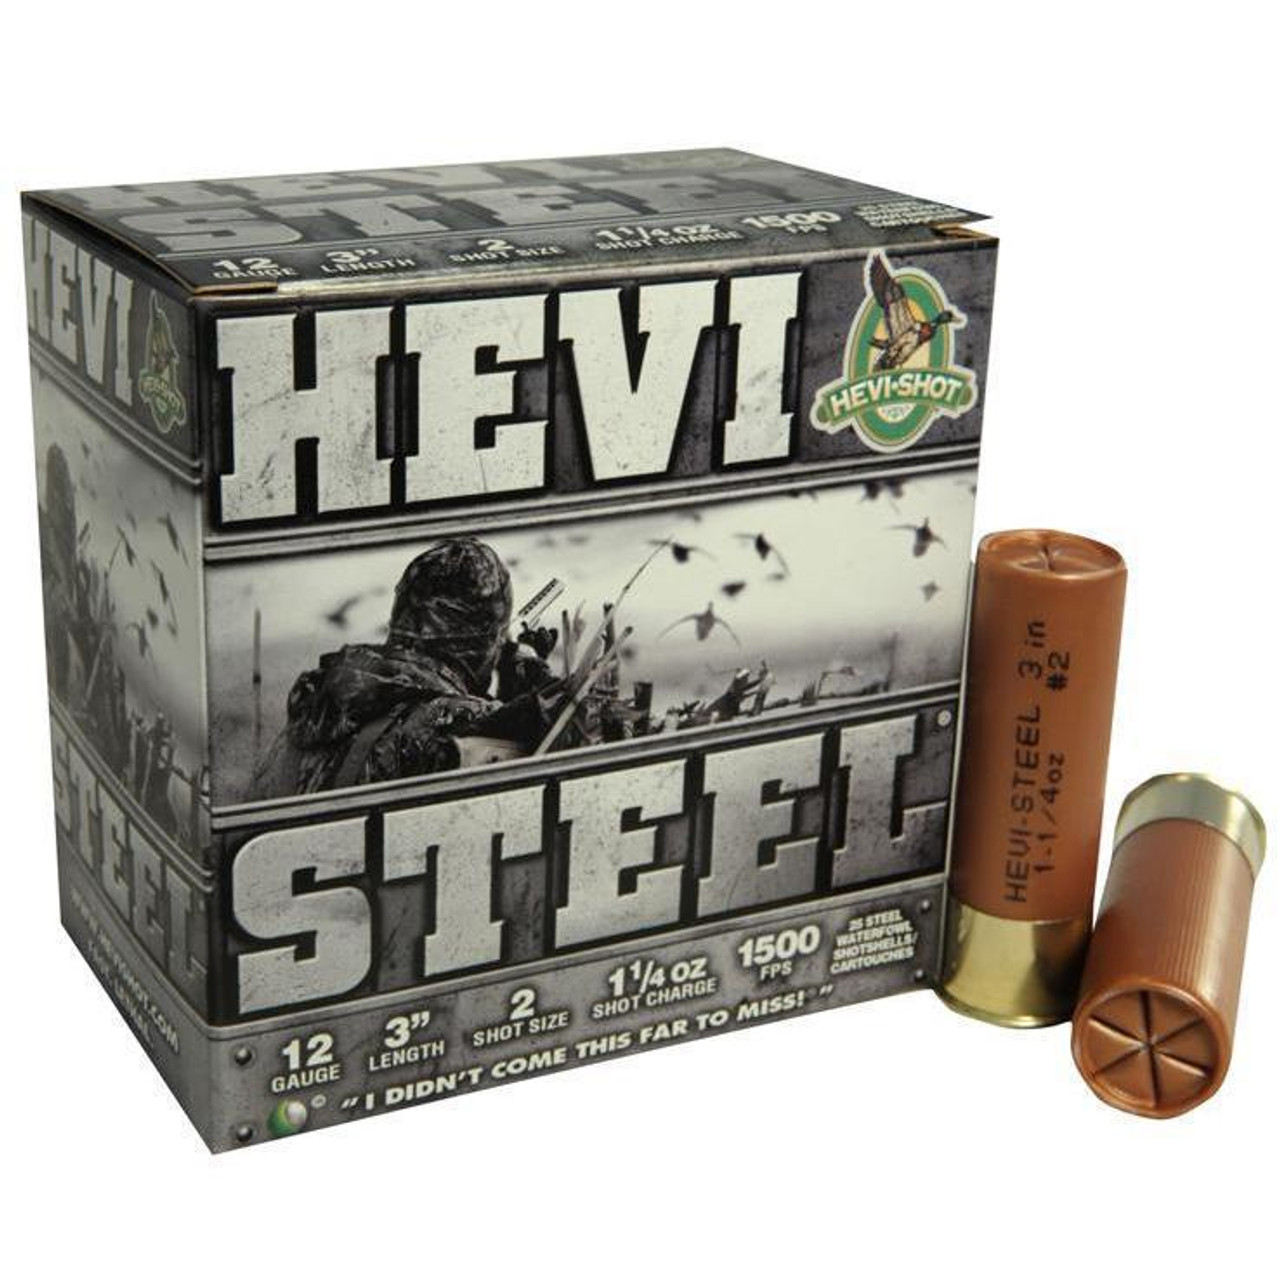 Hevi-Shot Hevi-Steel 12 Gauge 3in #2 1-1/4oz Waterfowl Shotshells - 25 Rounds - Hevi-Shot introduces their first ever all-steel shotshell, Hevi-Metal. With increased speeds and only the highest quality components, you experience better kill results.

 

Increased Speed & Knockdown Power
Custom Wad Design
Specifications
 
Length	3in
Gauge	12 Gauge
Lead Free	Yes
Pack Quantity	25
Shot Size	#2
Type	Waterfowl
Muzzle Velocity	1500 FPS
Weight	1-1/4oz
